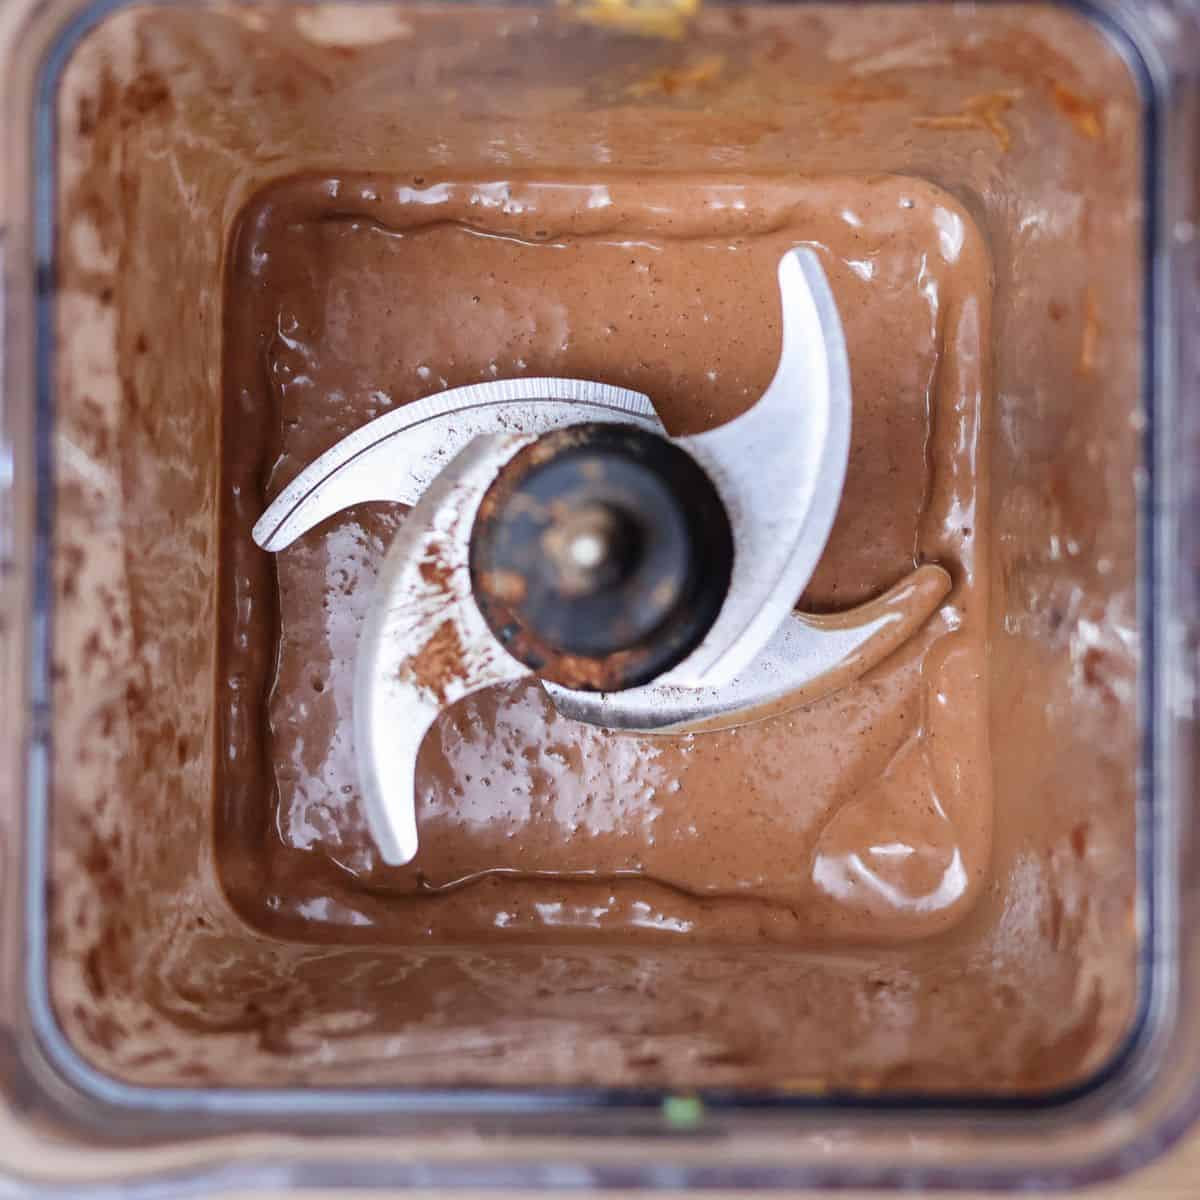 A blender jar filled with chocolate smoothie. The smoothie is a dark, rich brown color and has a smooth, viscous texture. There are no visible chunks of chocolate or other ingredients.